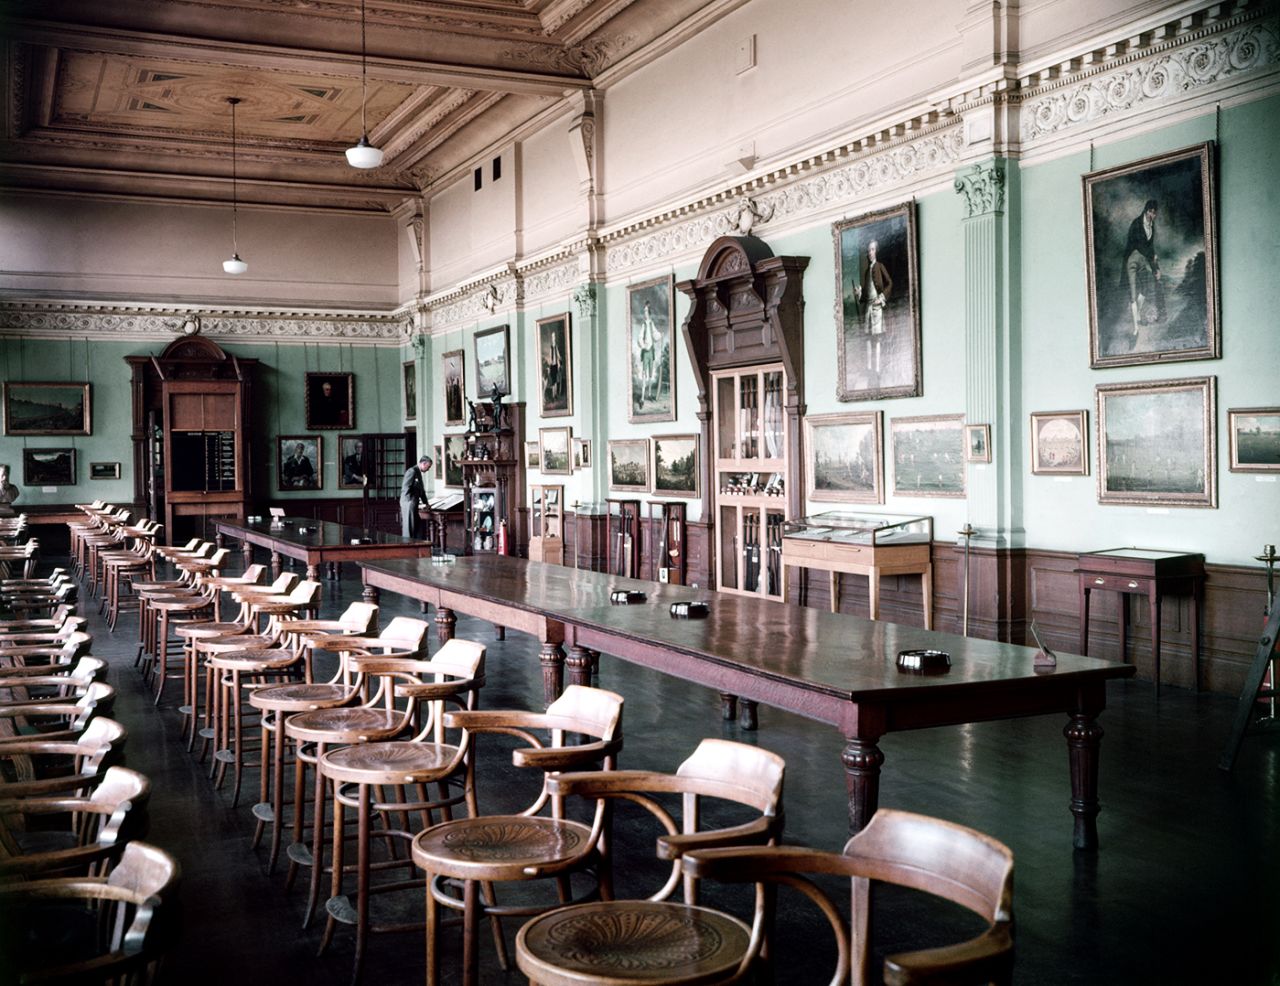 The Long Room at Lord's, January 30, 1984